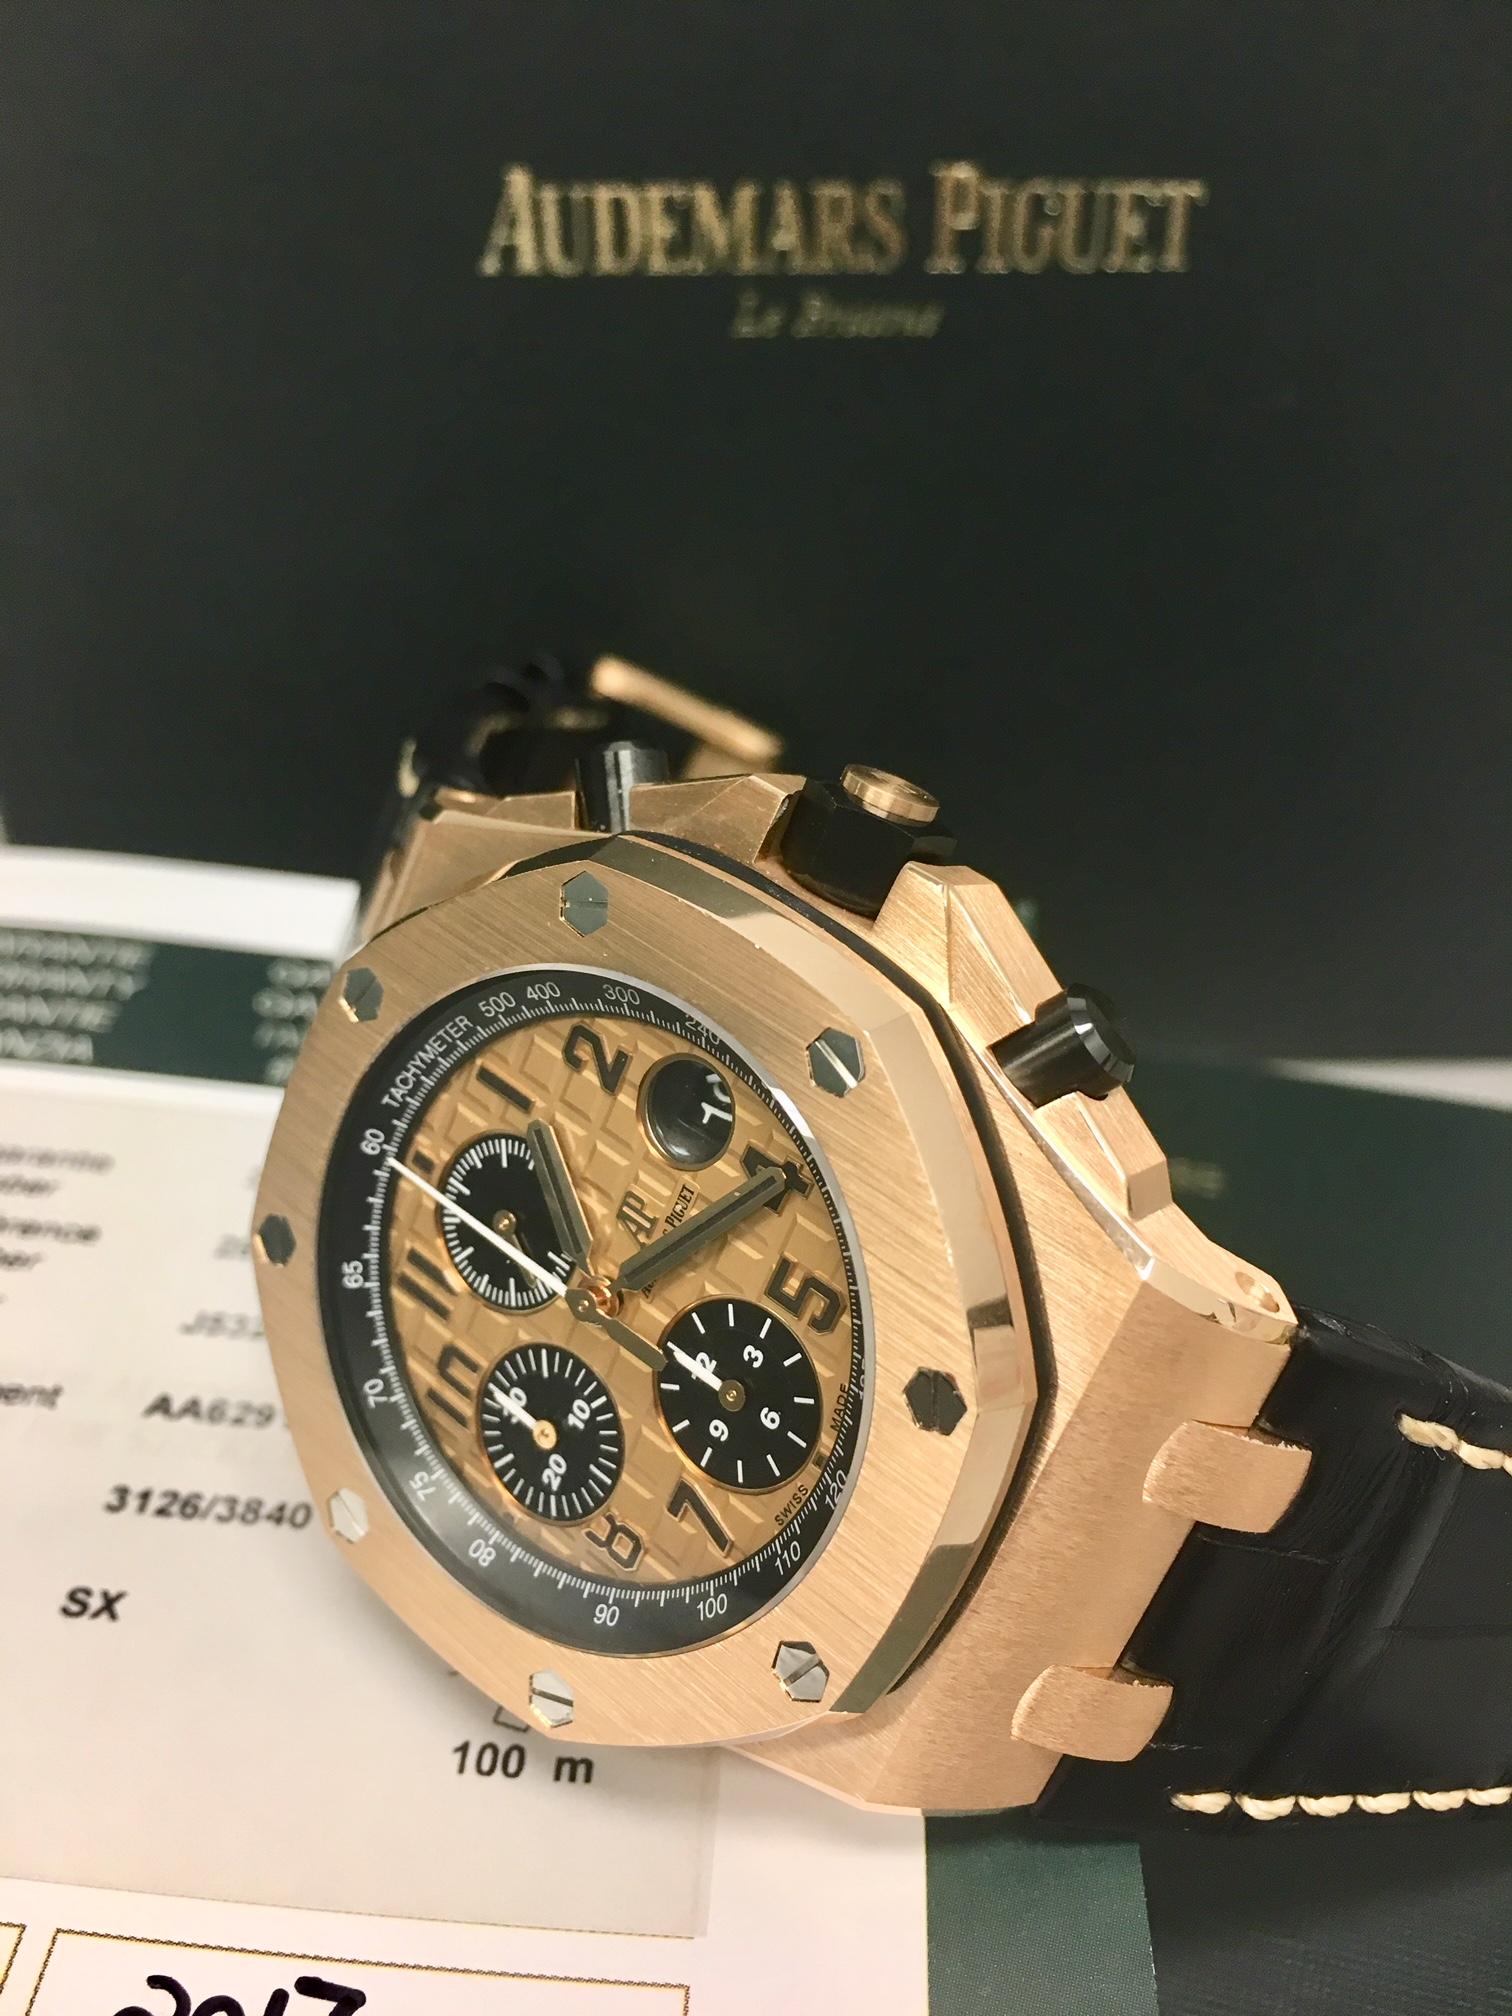 Audemars Piguet Royal Oak Offshore Chronograph Model 26470OR.OO.1.A002CR. Never Worn Mens Automatic wrist watch. A. P. Caliber 3126 / 3840 Automatic Winding Movement with chronograph, hours, minutes, small seconds, date and approximately 50 hours of